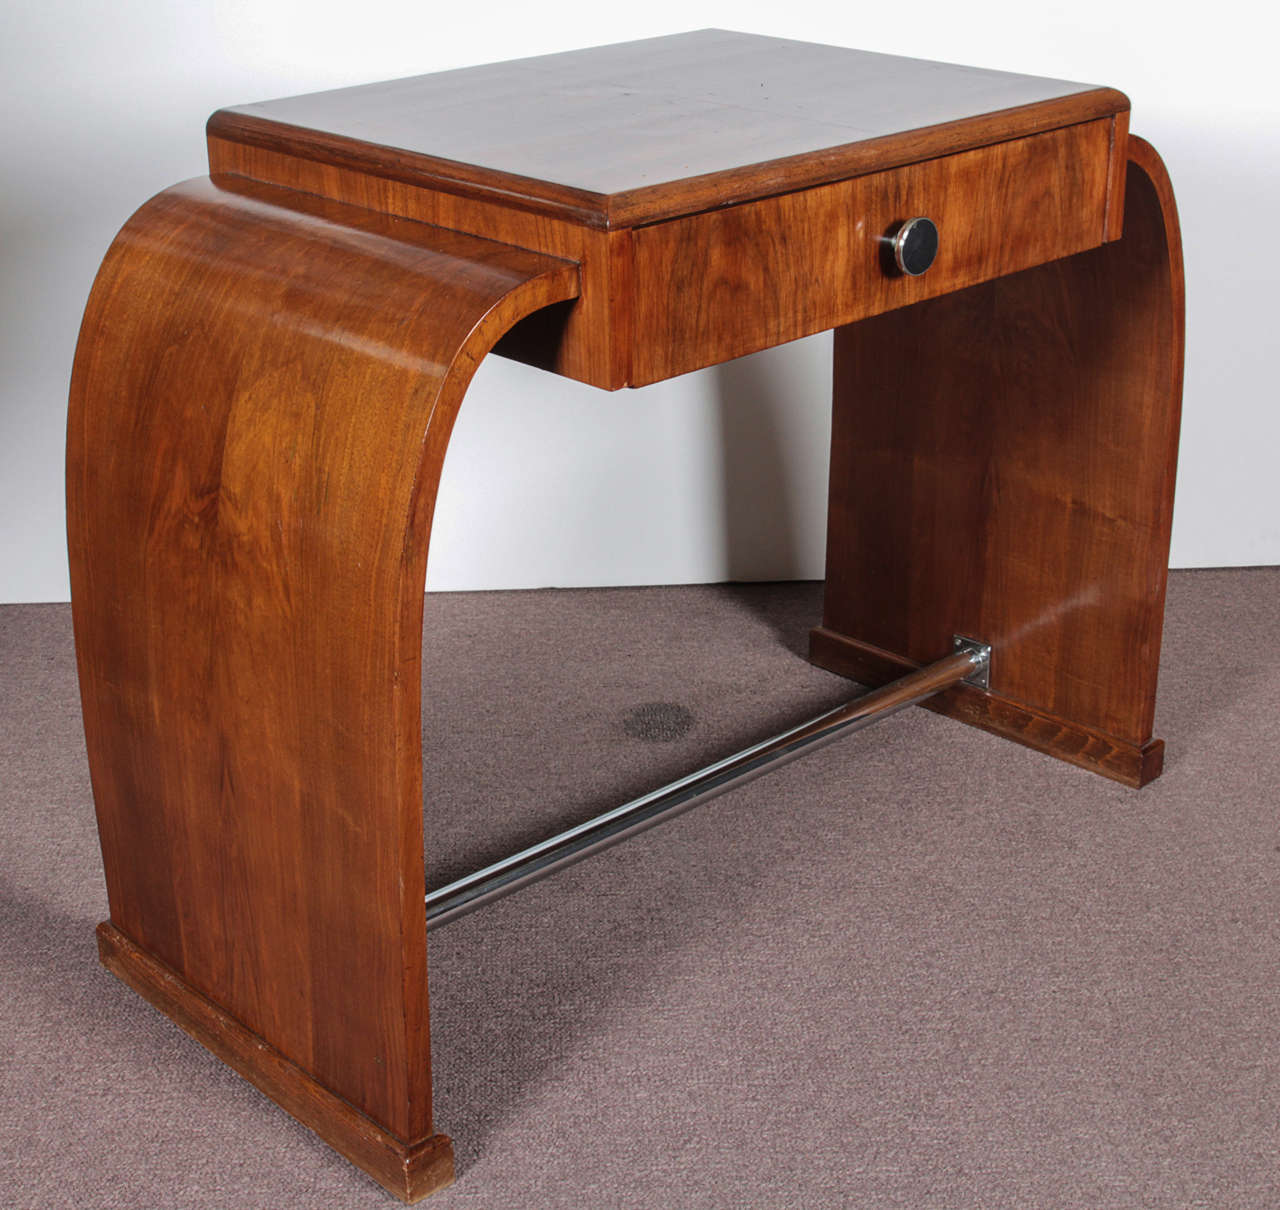 A lovely, original French Art Deco walnut desk/ vanity. Typical Art Deco waterfall design in book matched walnut, single drawer, tubular chrome foot rest and chrome hardware pull.
Although the maximum depth at the top is 19